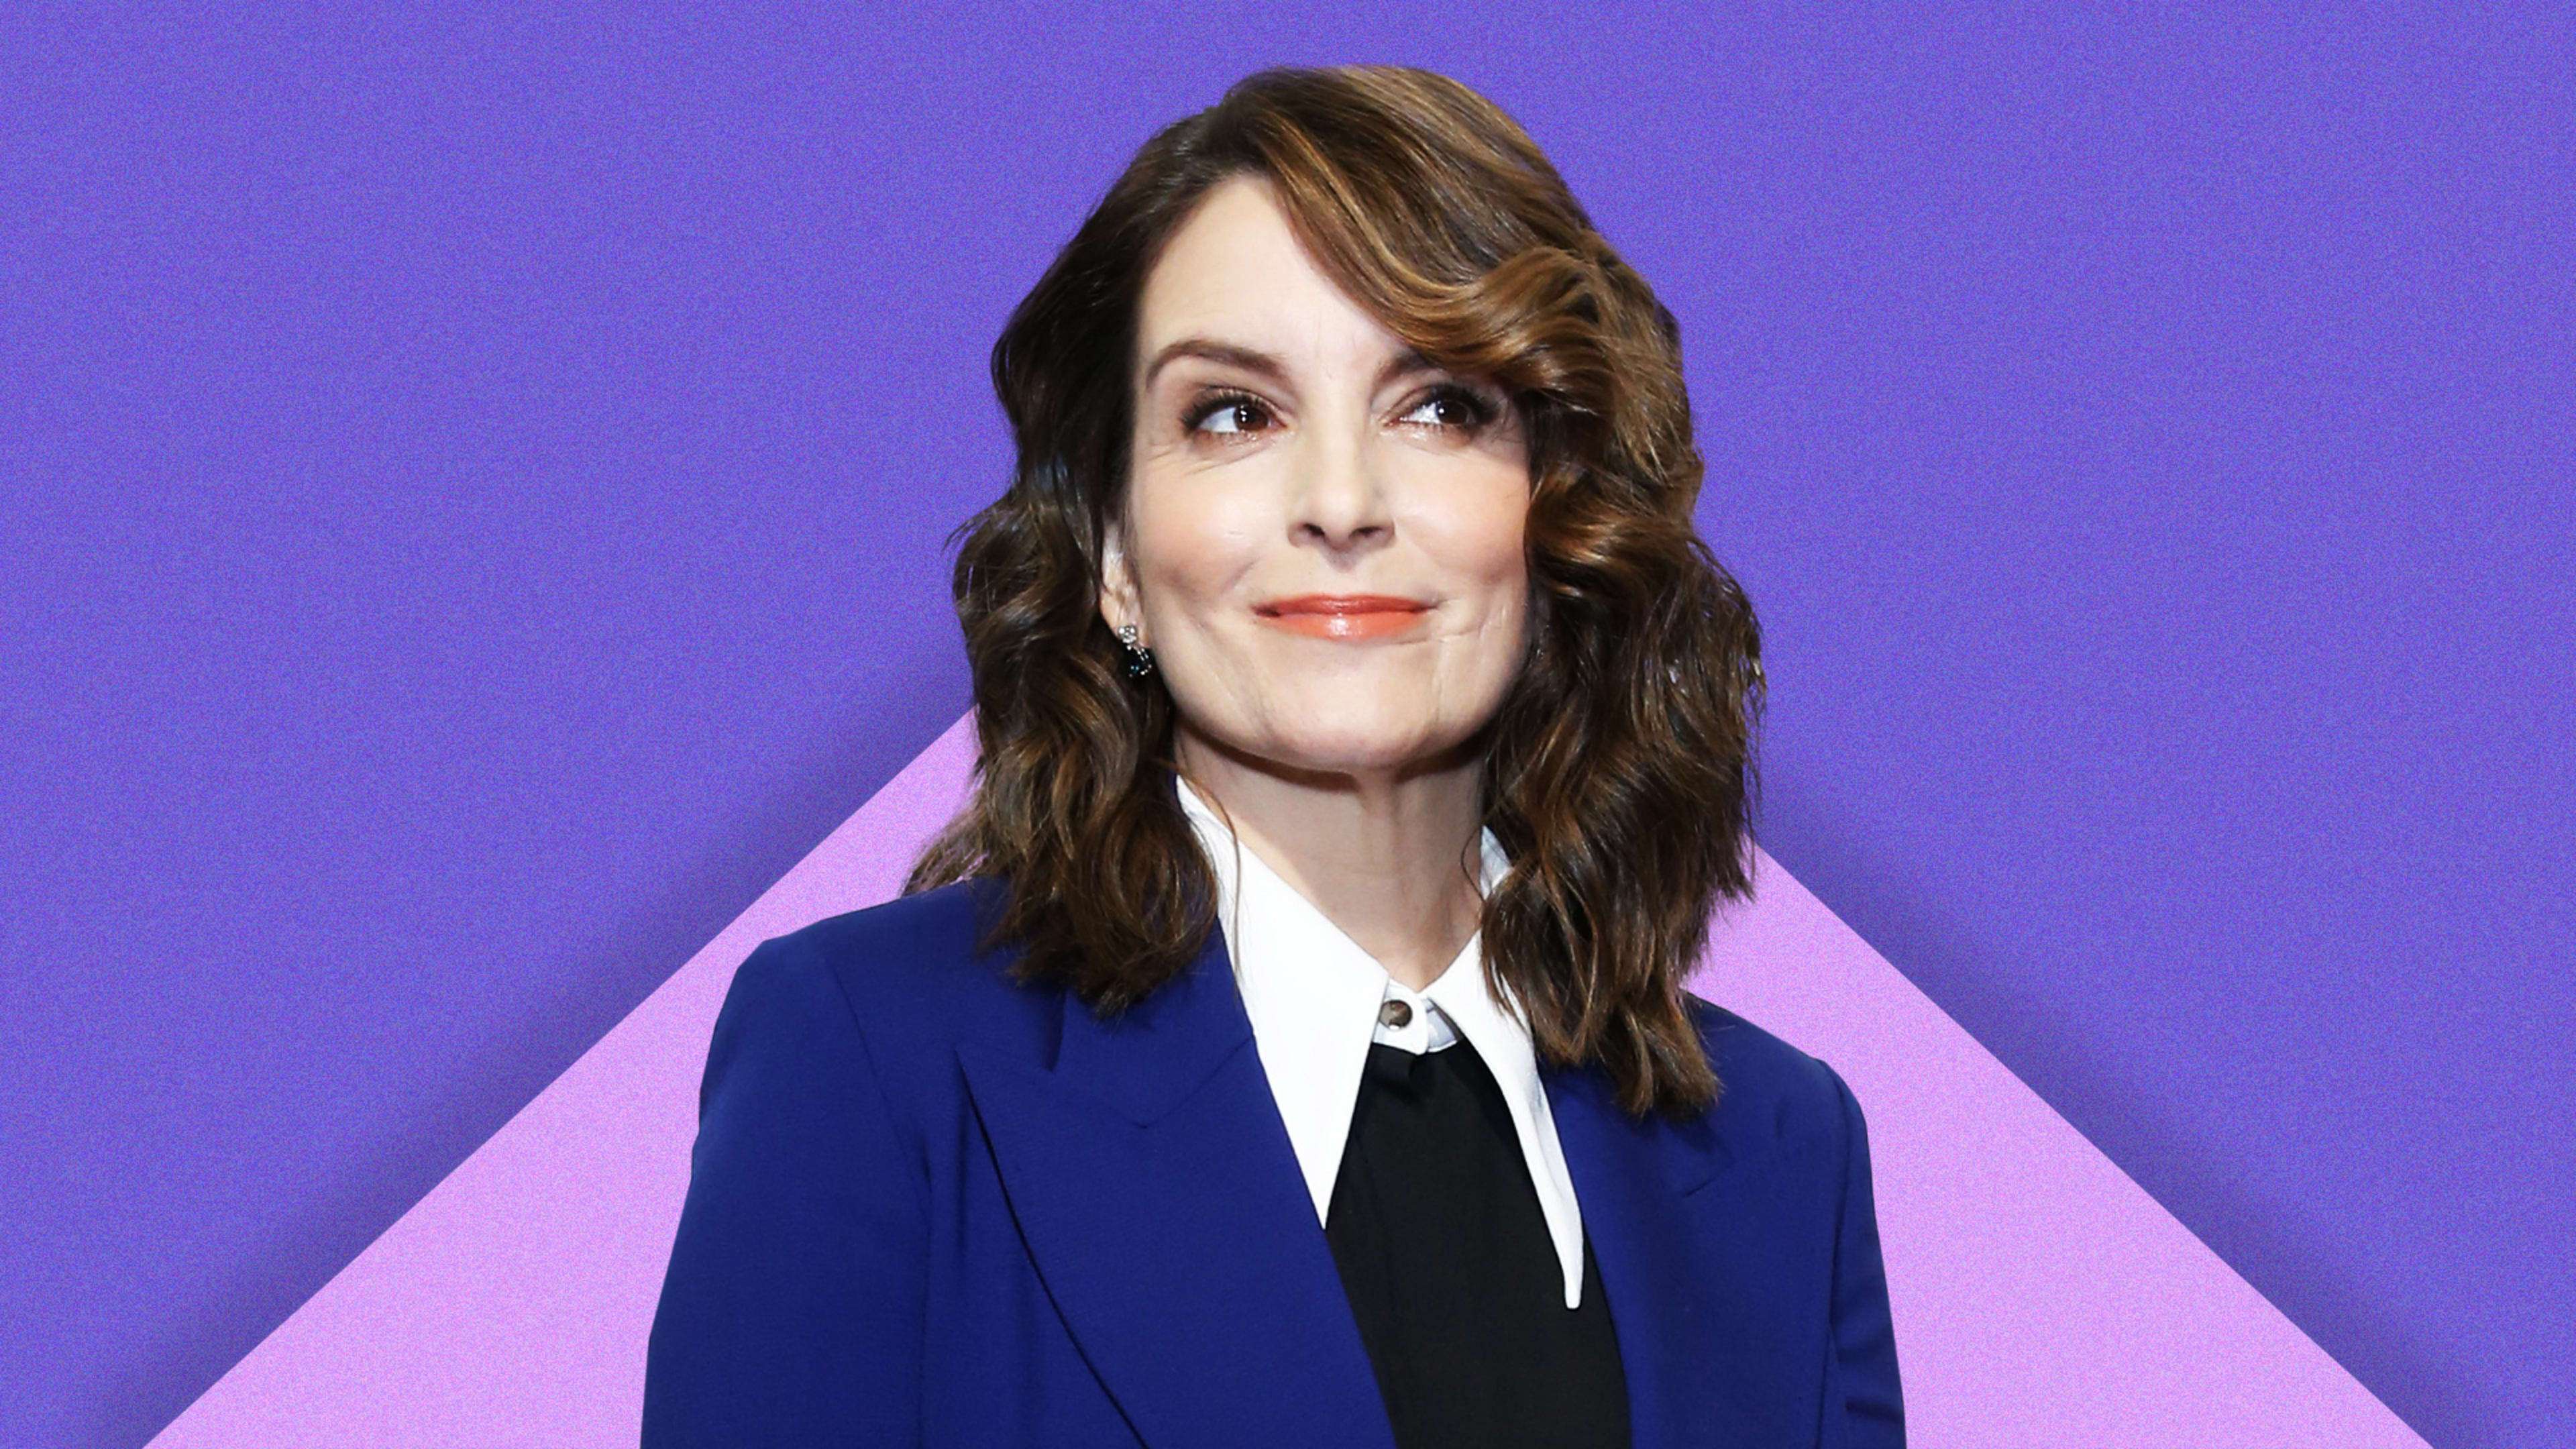 At Tina Fey’s request, ’30 Rock’ is the latest show to pull its blackface episodes